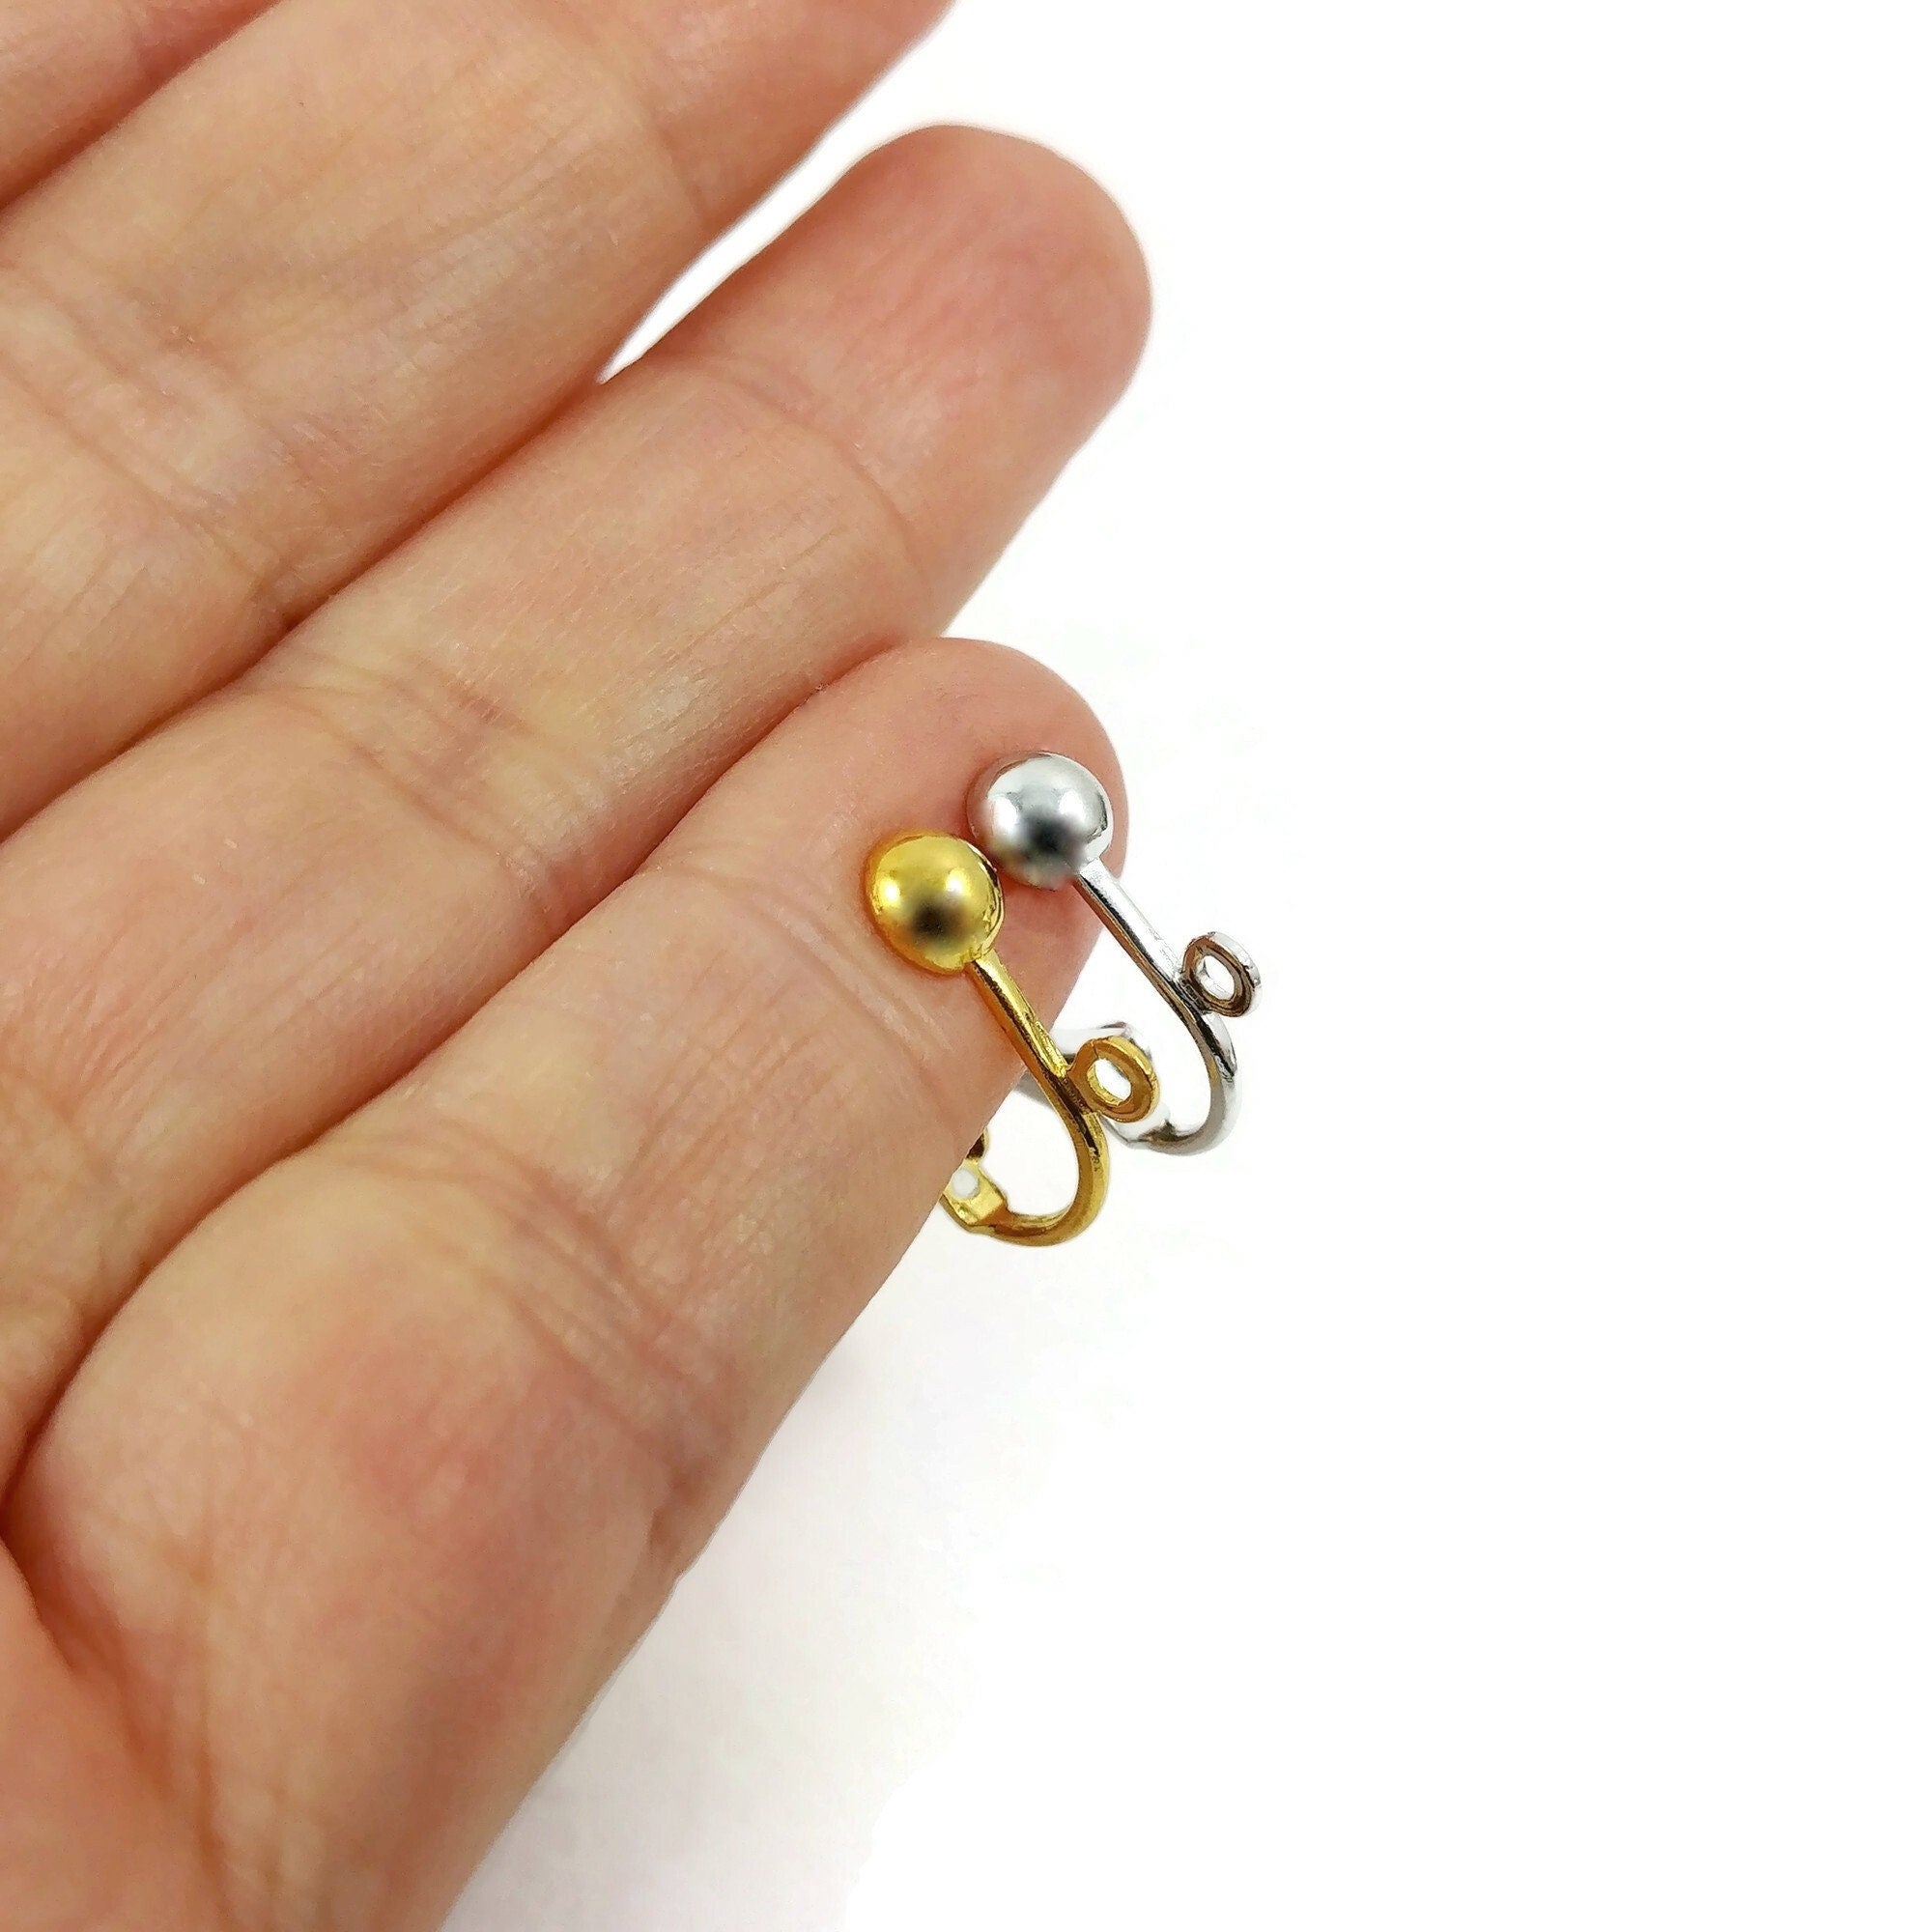 Earring Findings, Clip On Earrings with Ball 16mm, Gold Plated (2 Pairs) 